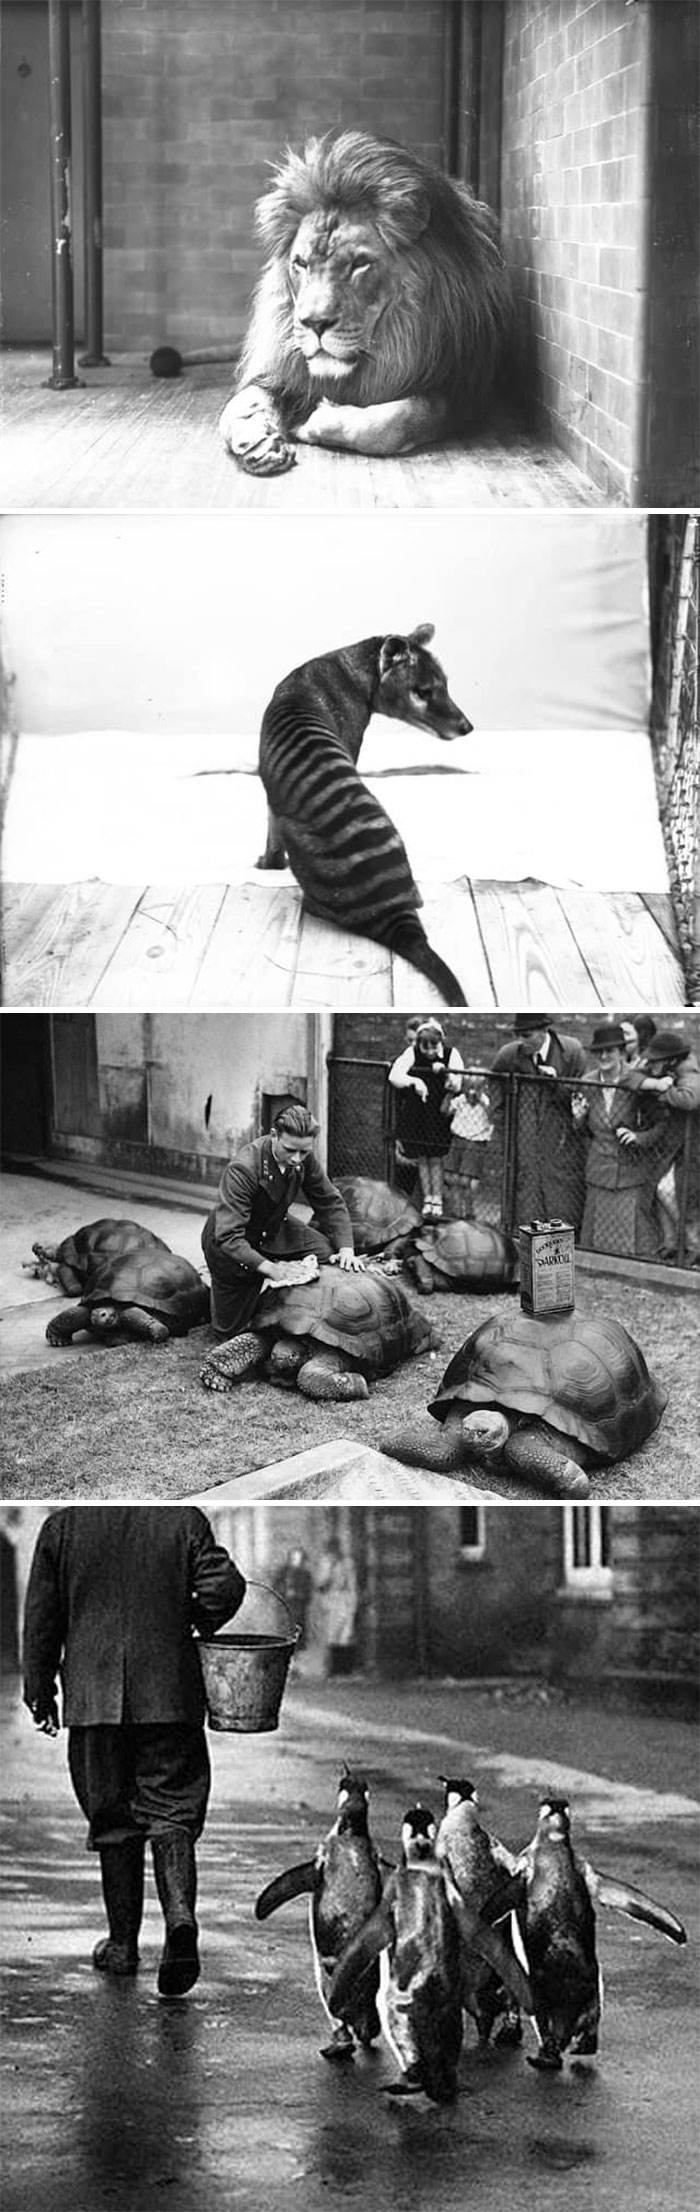 Vintage Photography - The Zoo